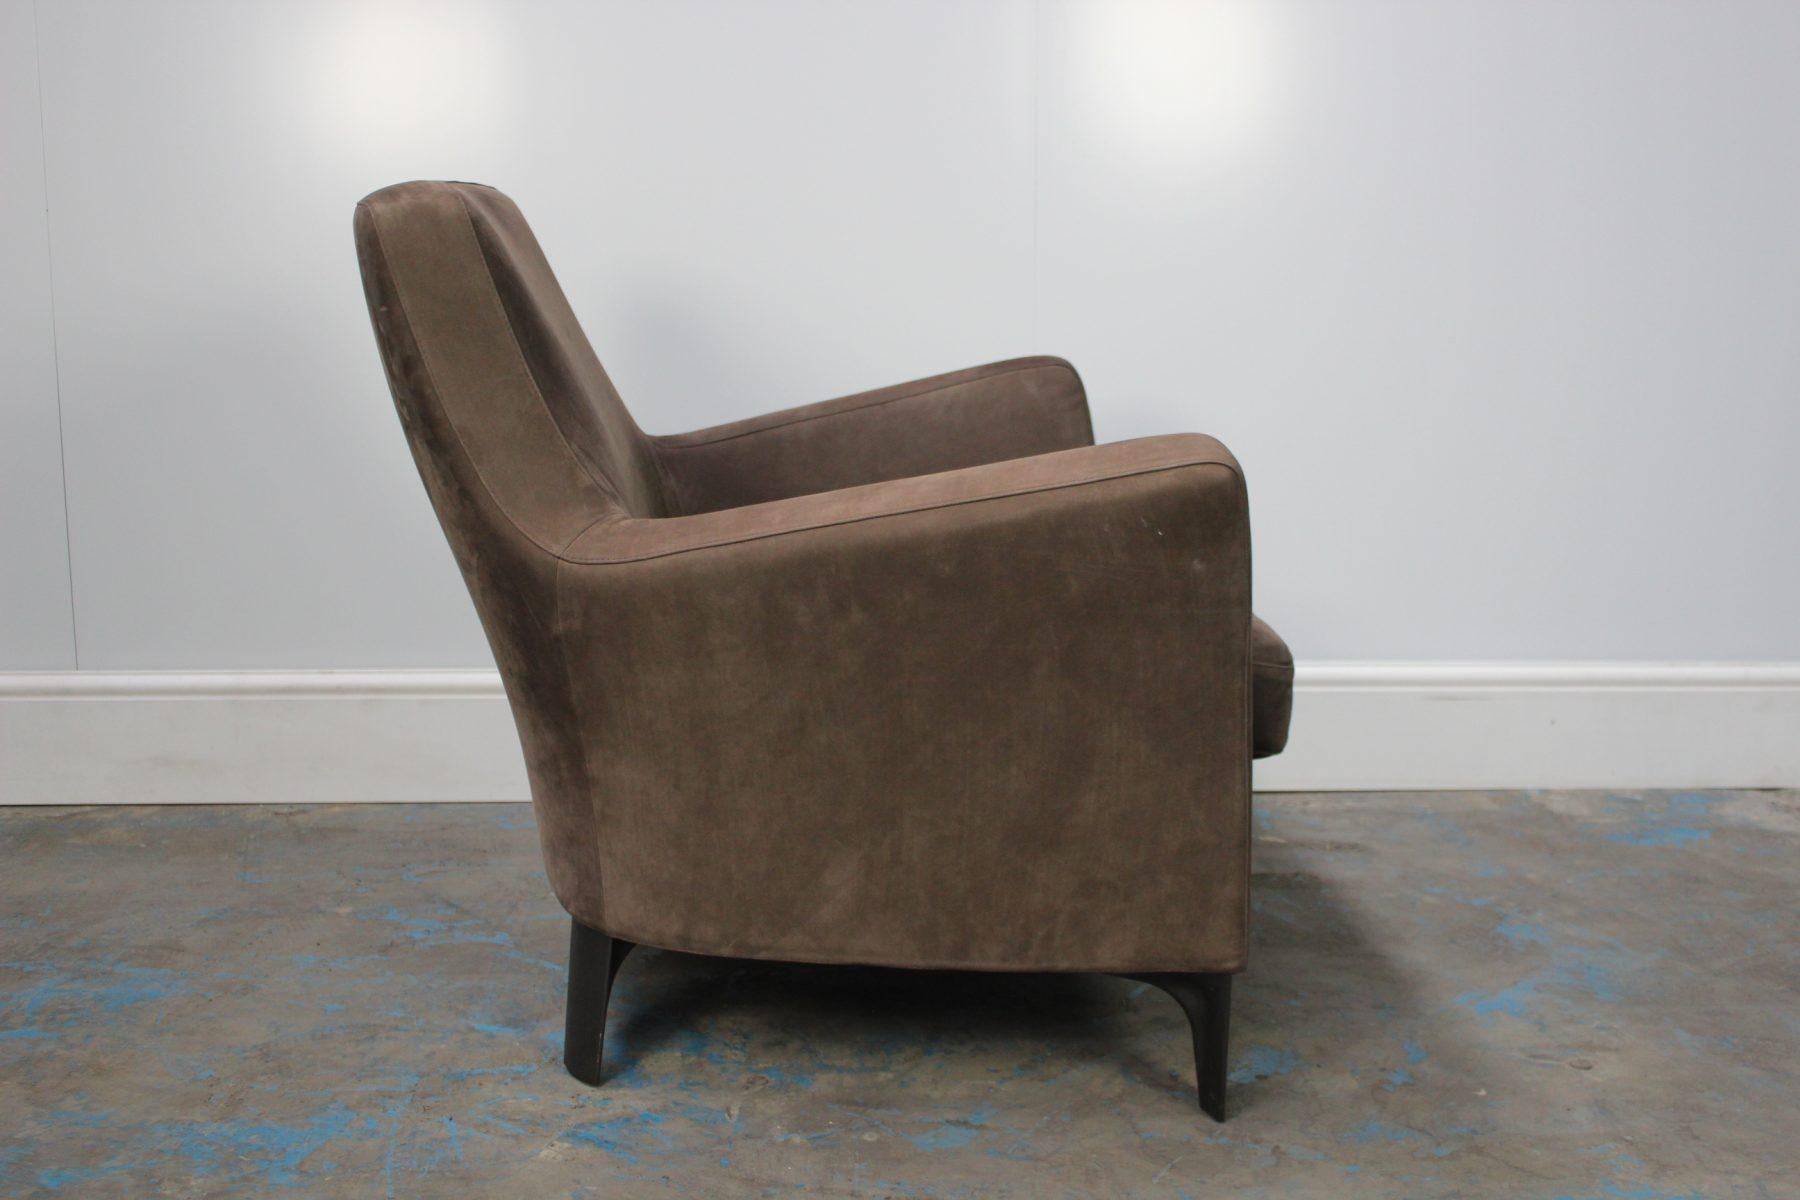 Peerless Pristine Minotti “Denny” Armchair in Suede Leather In Good Condition For Sale In Barrowford, GB